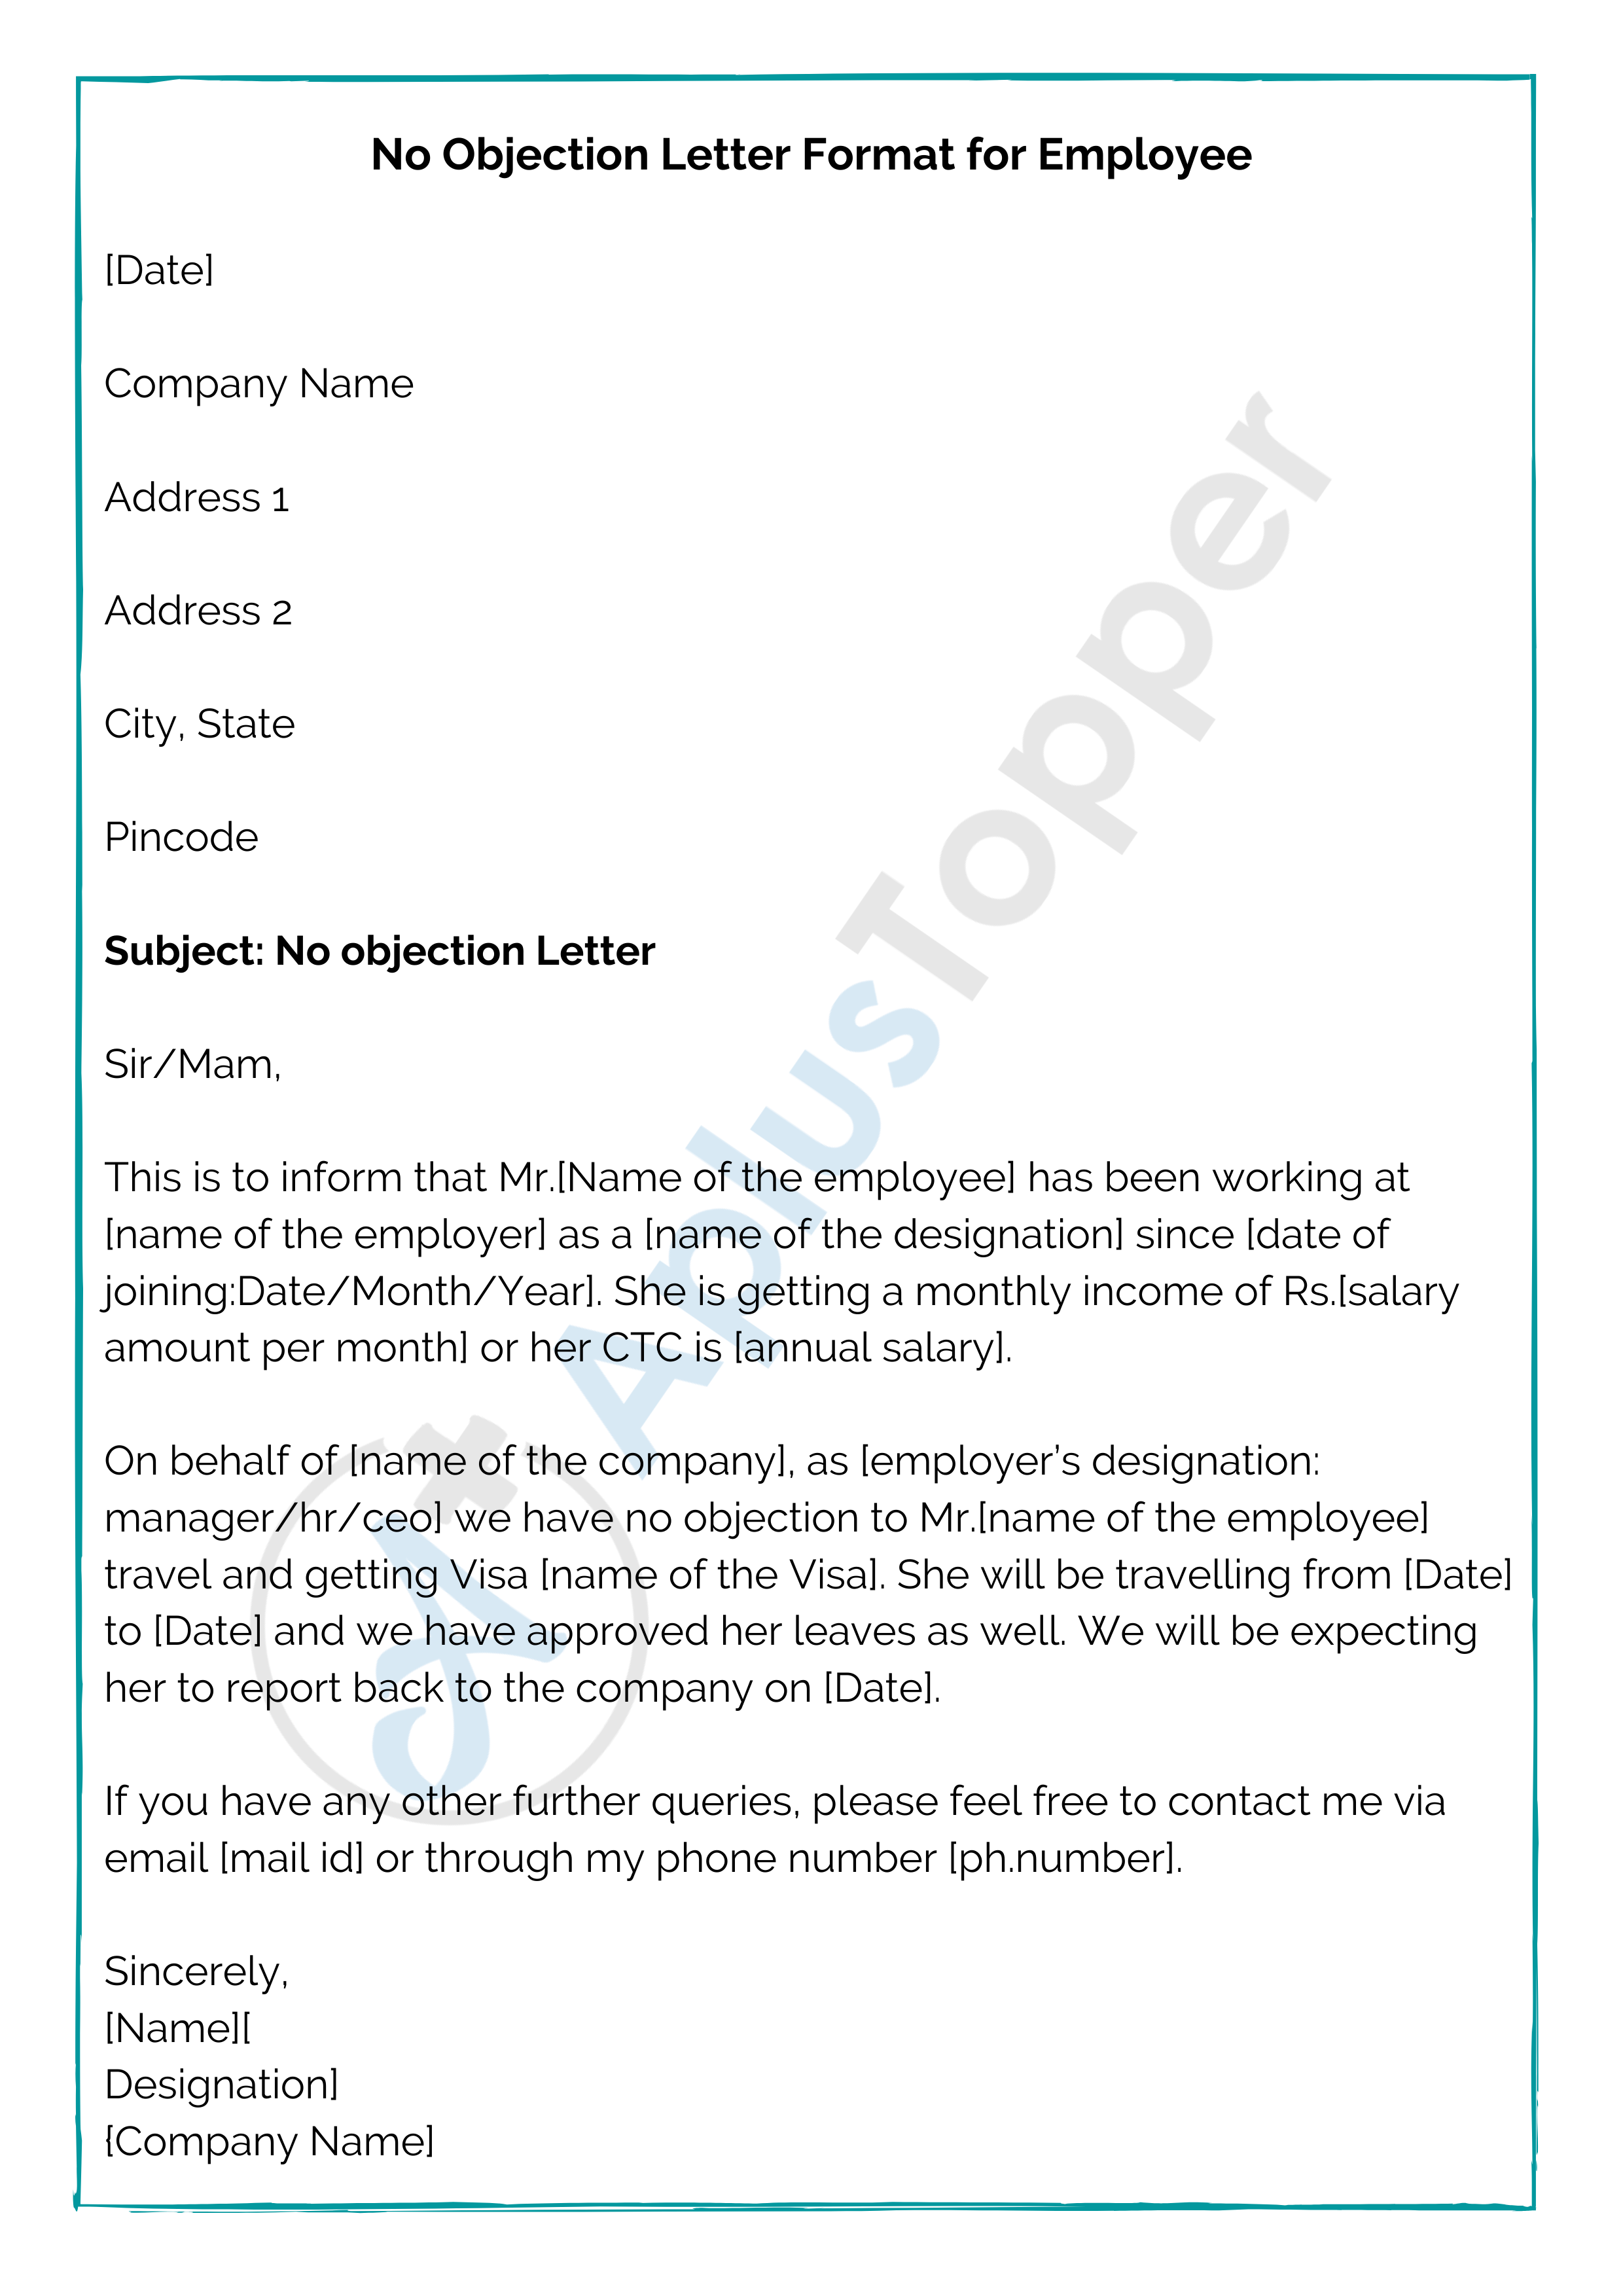 No Objection Letter  Format, Samples, How To Write No Objection For Letter Of Objection Template